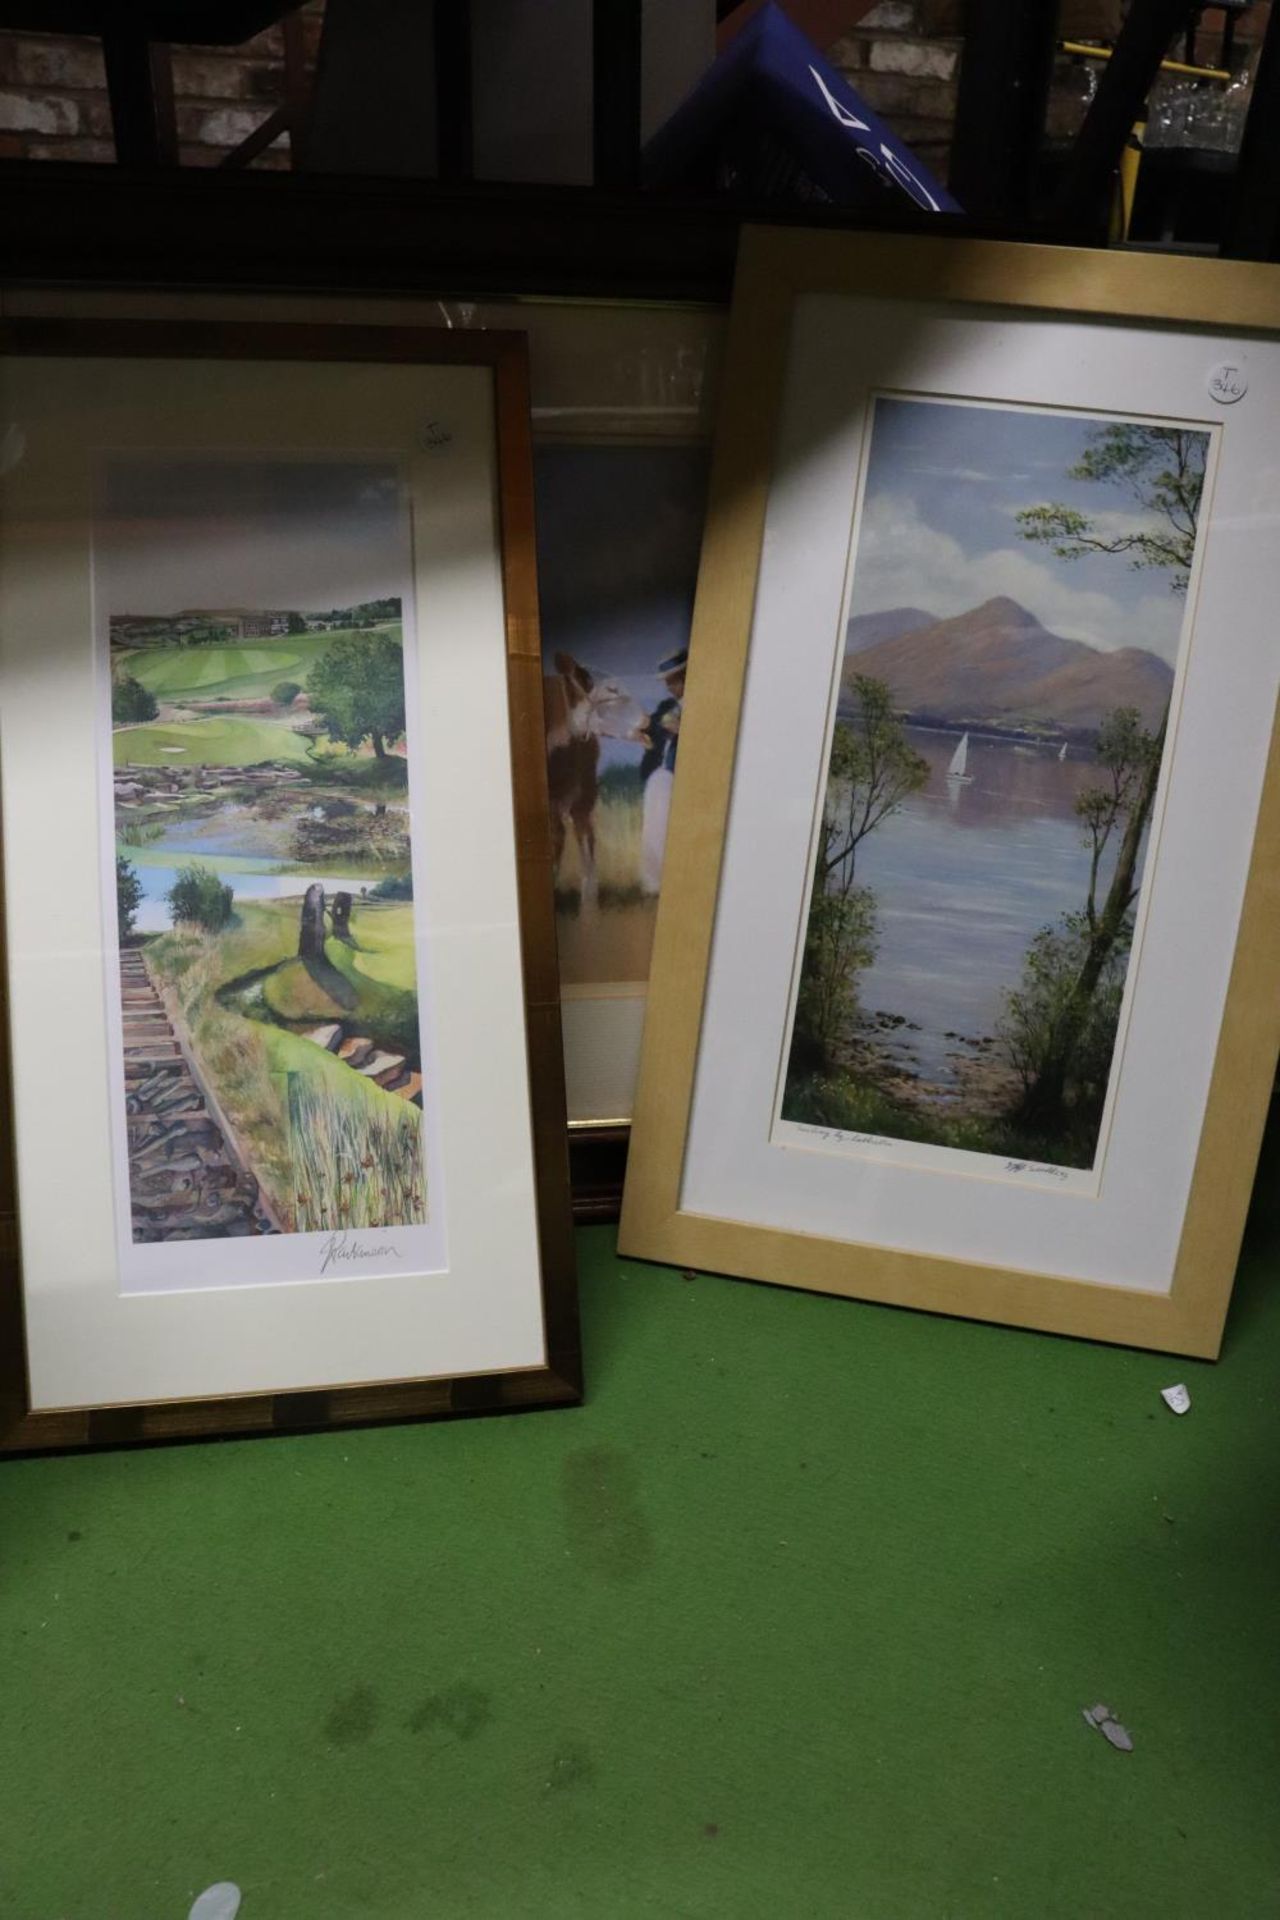 THREE FRAMED PRINTS TO INCLUDE A CALF WITH YOUNG GIRLS, A LAKE AND MOUNTAINS, ETC